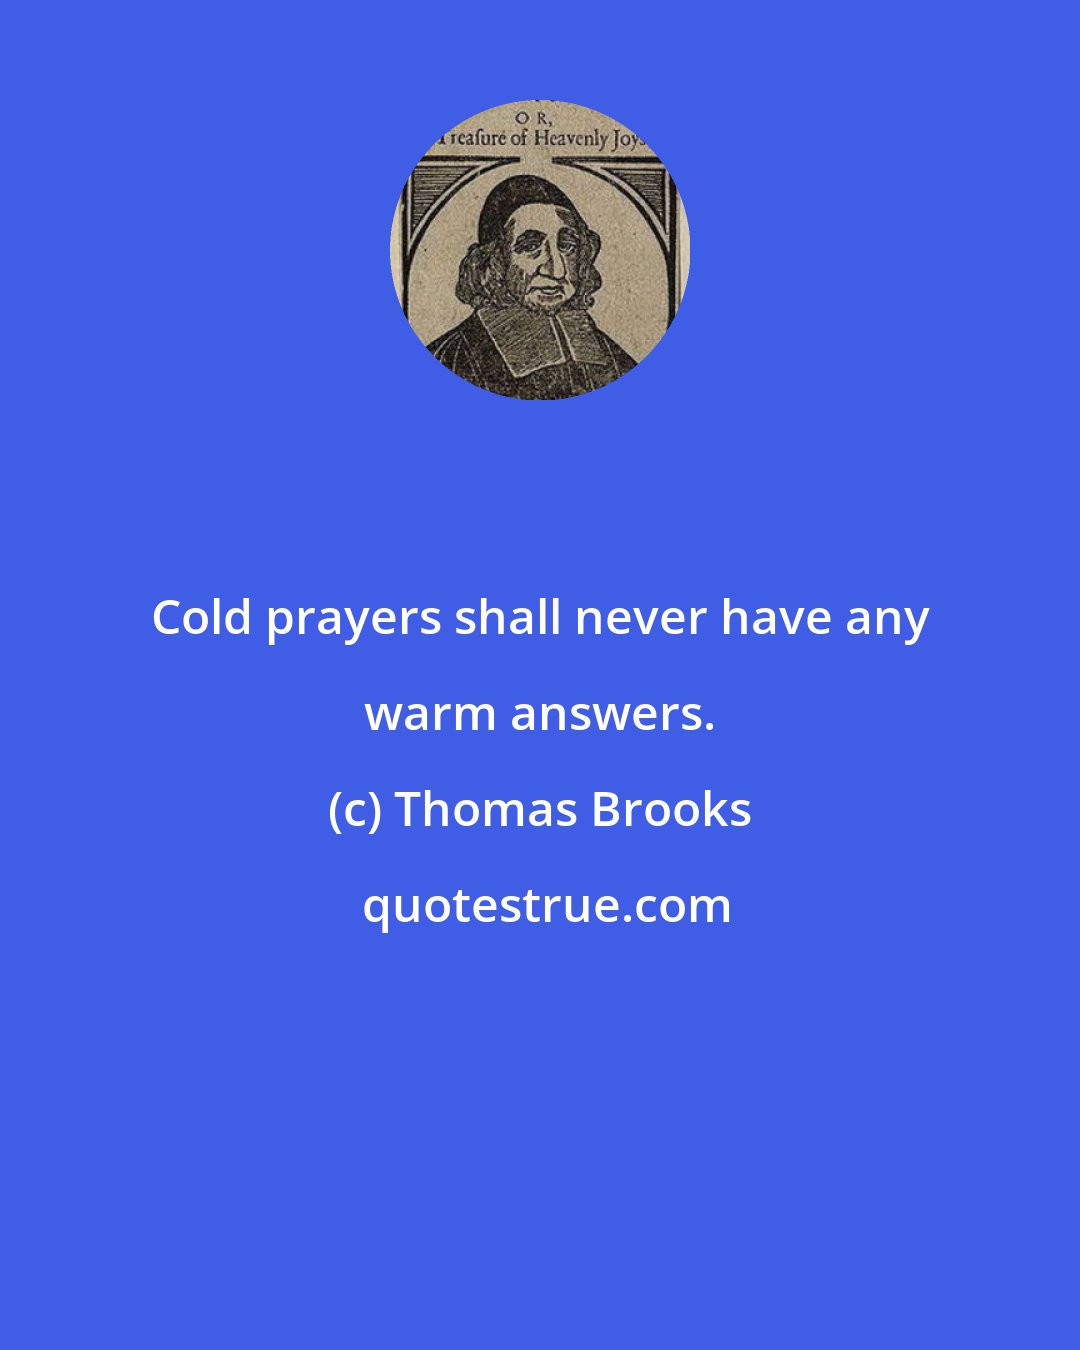 Thomas Brooks: Cold prayers shall never have any warm answers.